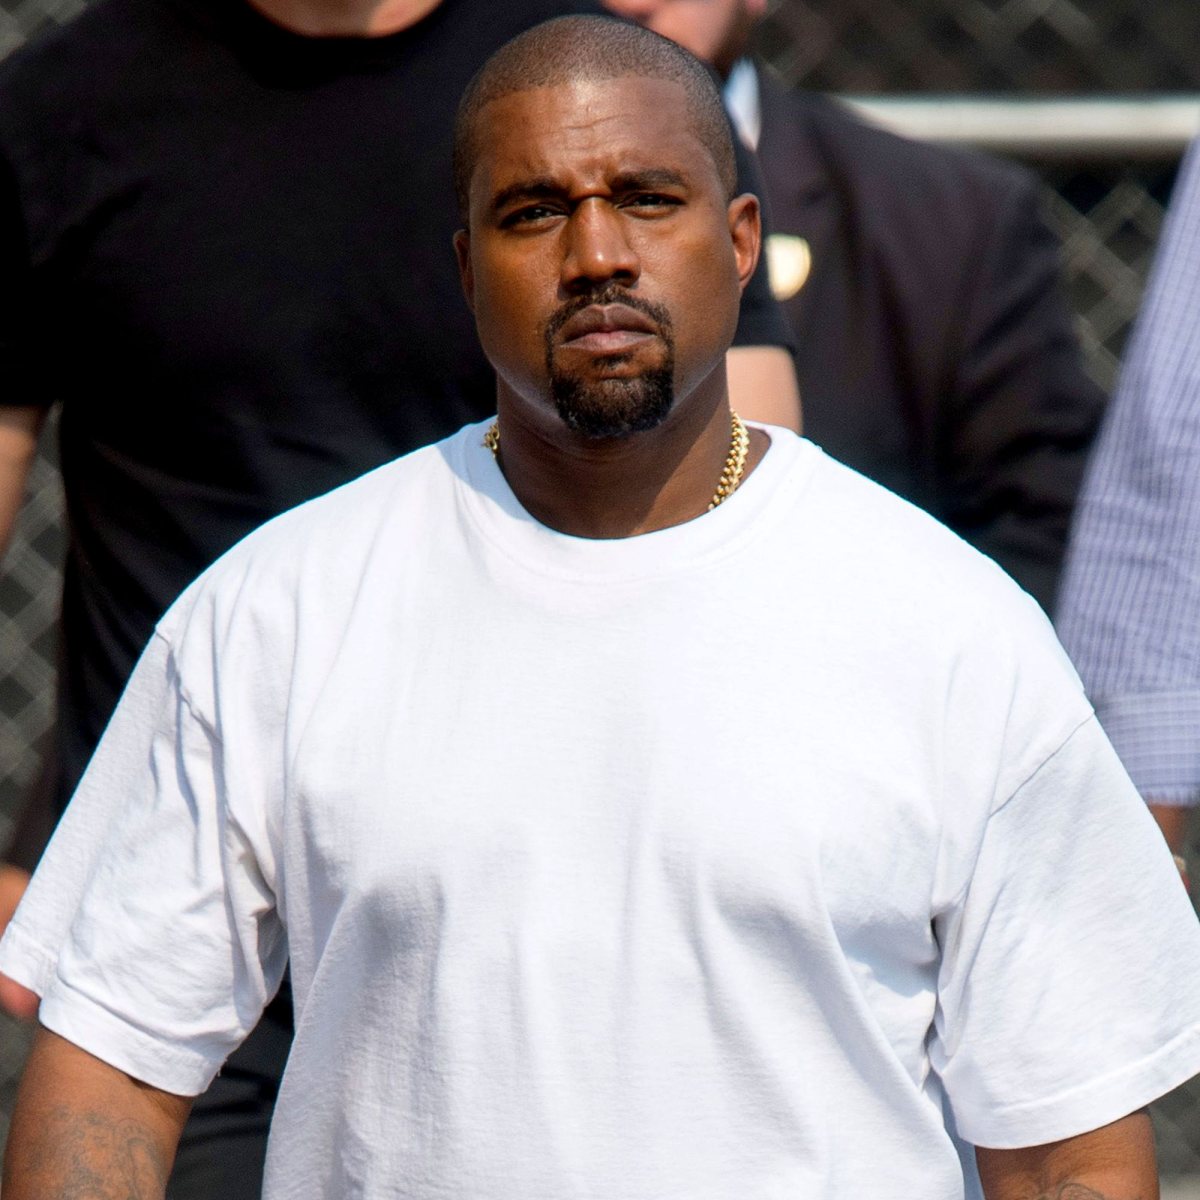 How Much Money Did Kanye Lose From Adidas?